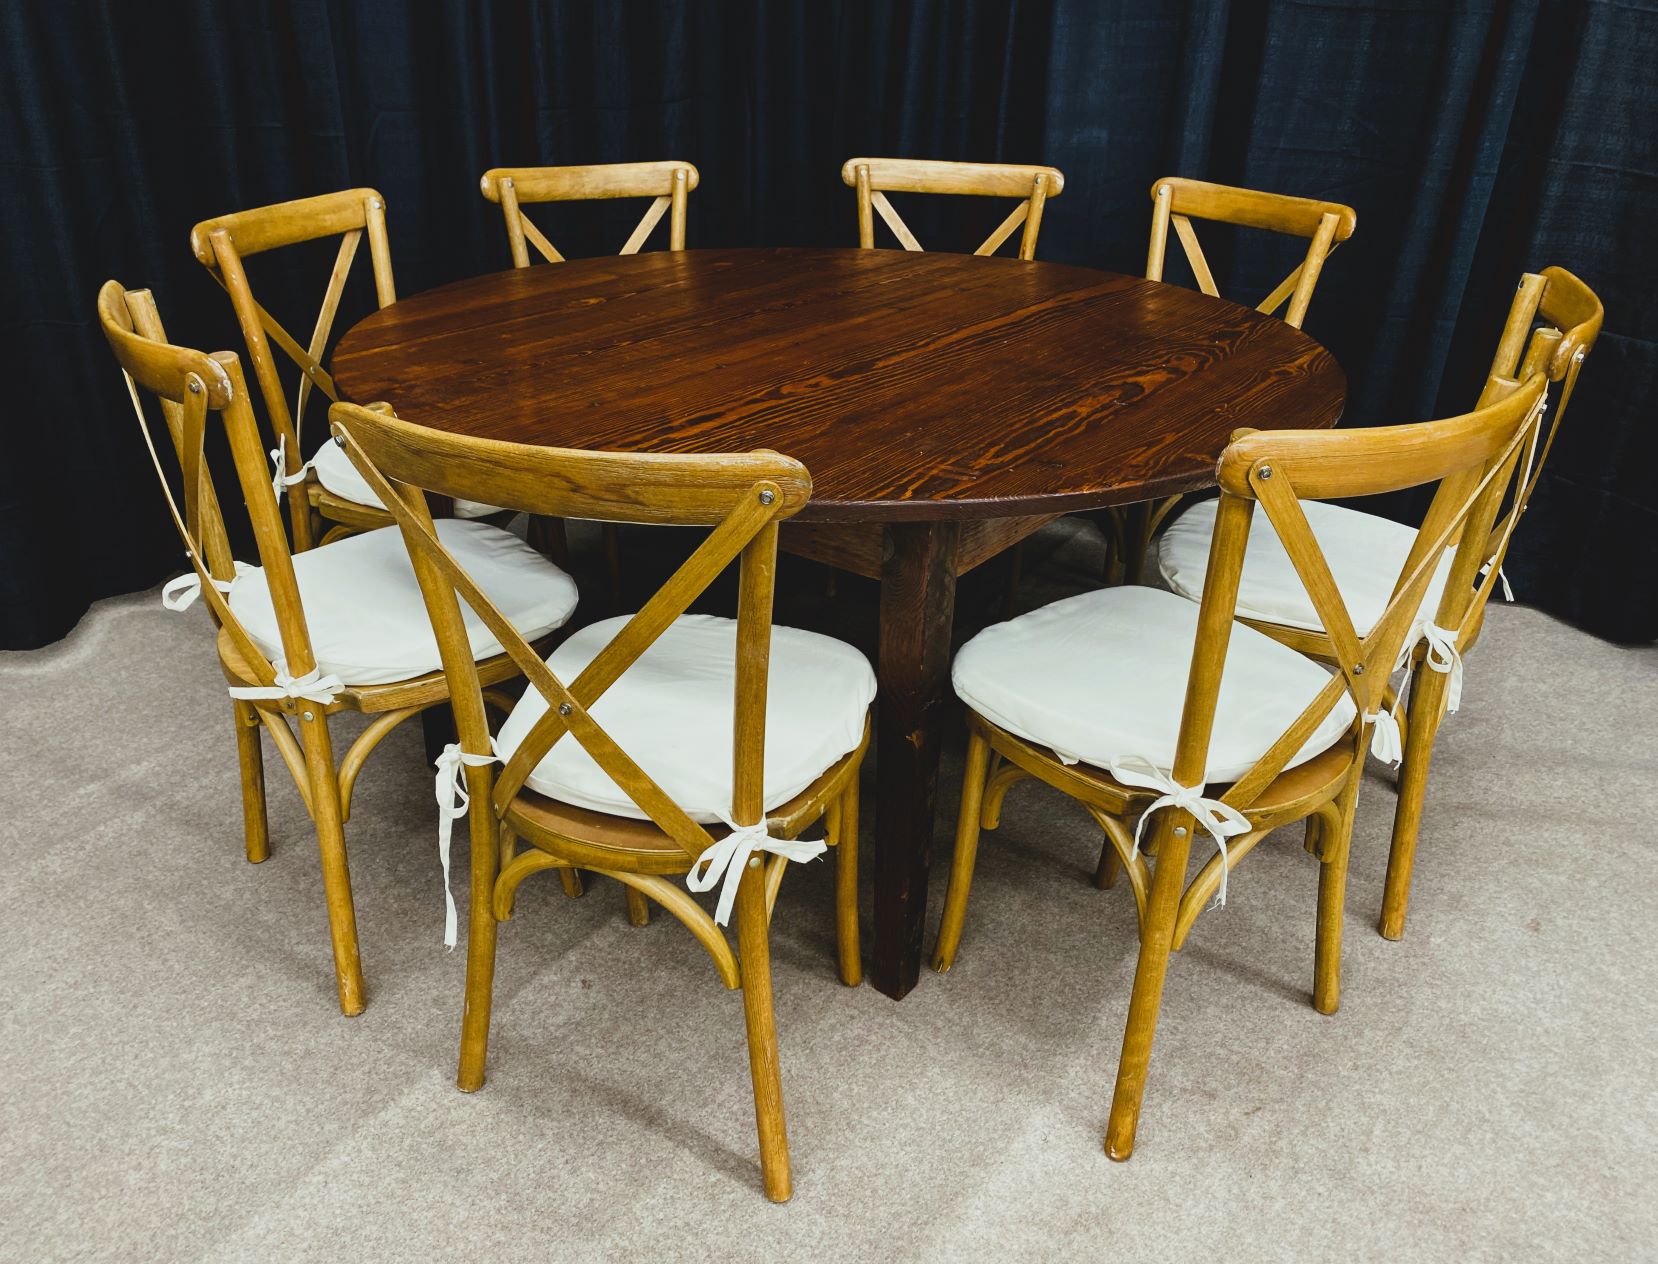 60 in. Round Farm Tables with Cross Back Chairs